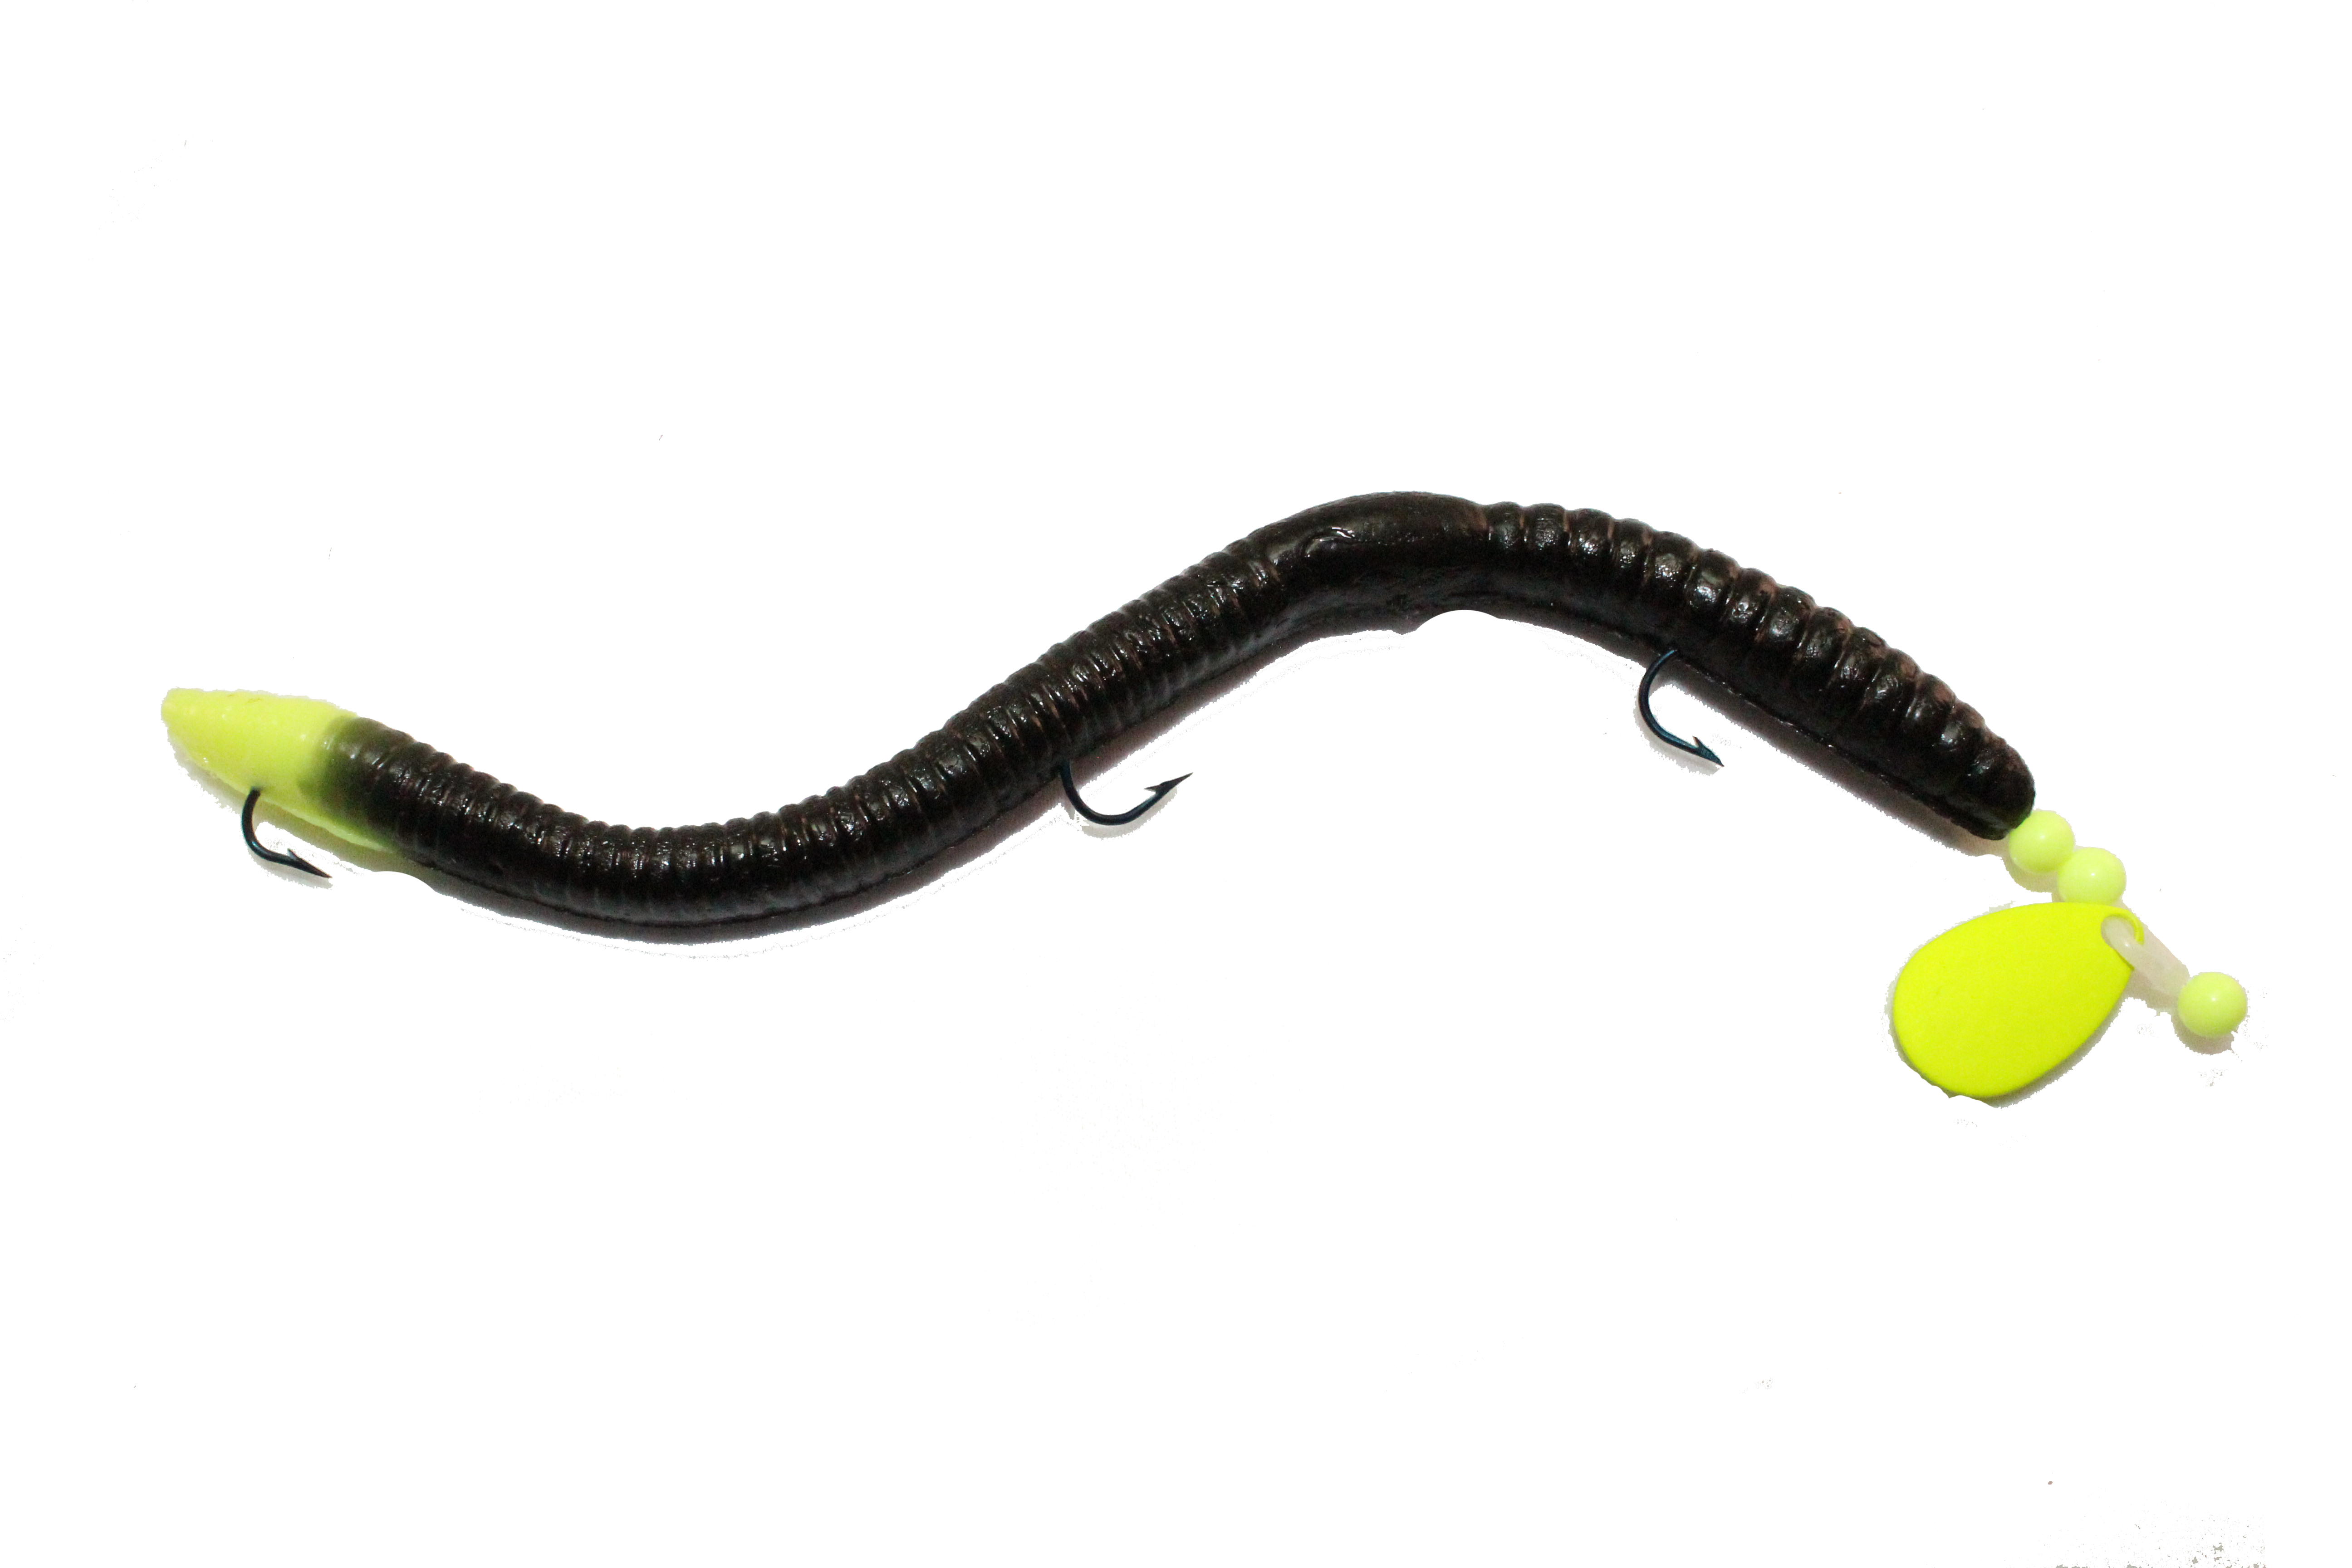 WALLEYE SPINNER RIG - BLACK/CHART TAIL & BLADE - IKE-CON Fishing Tackle